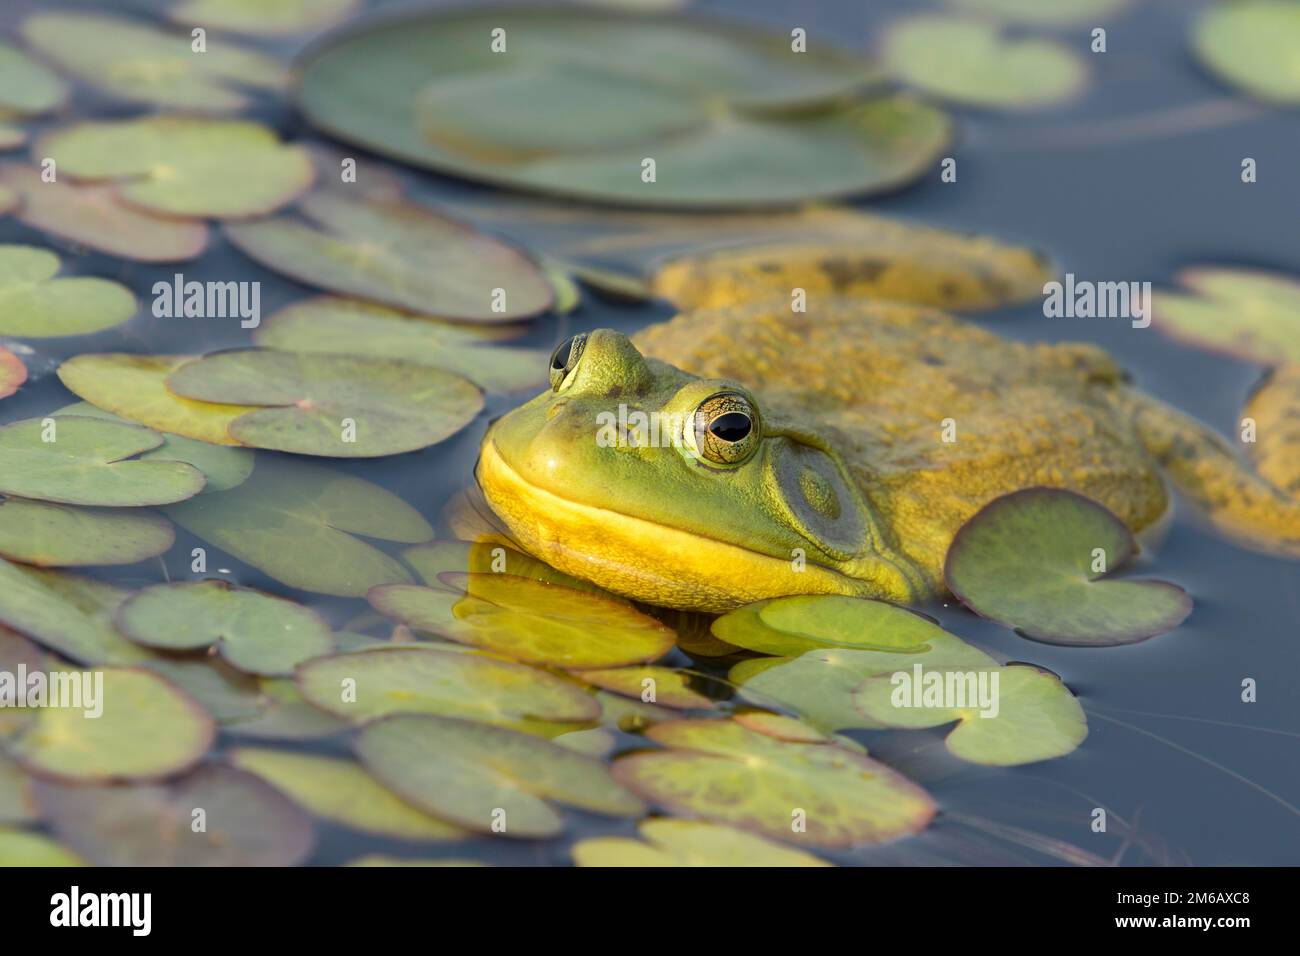 North american bull frog watching at the surface of a lake. Frog resting on aquatic vegetation. (Lithobates catesbeianus) Stock Photo